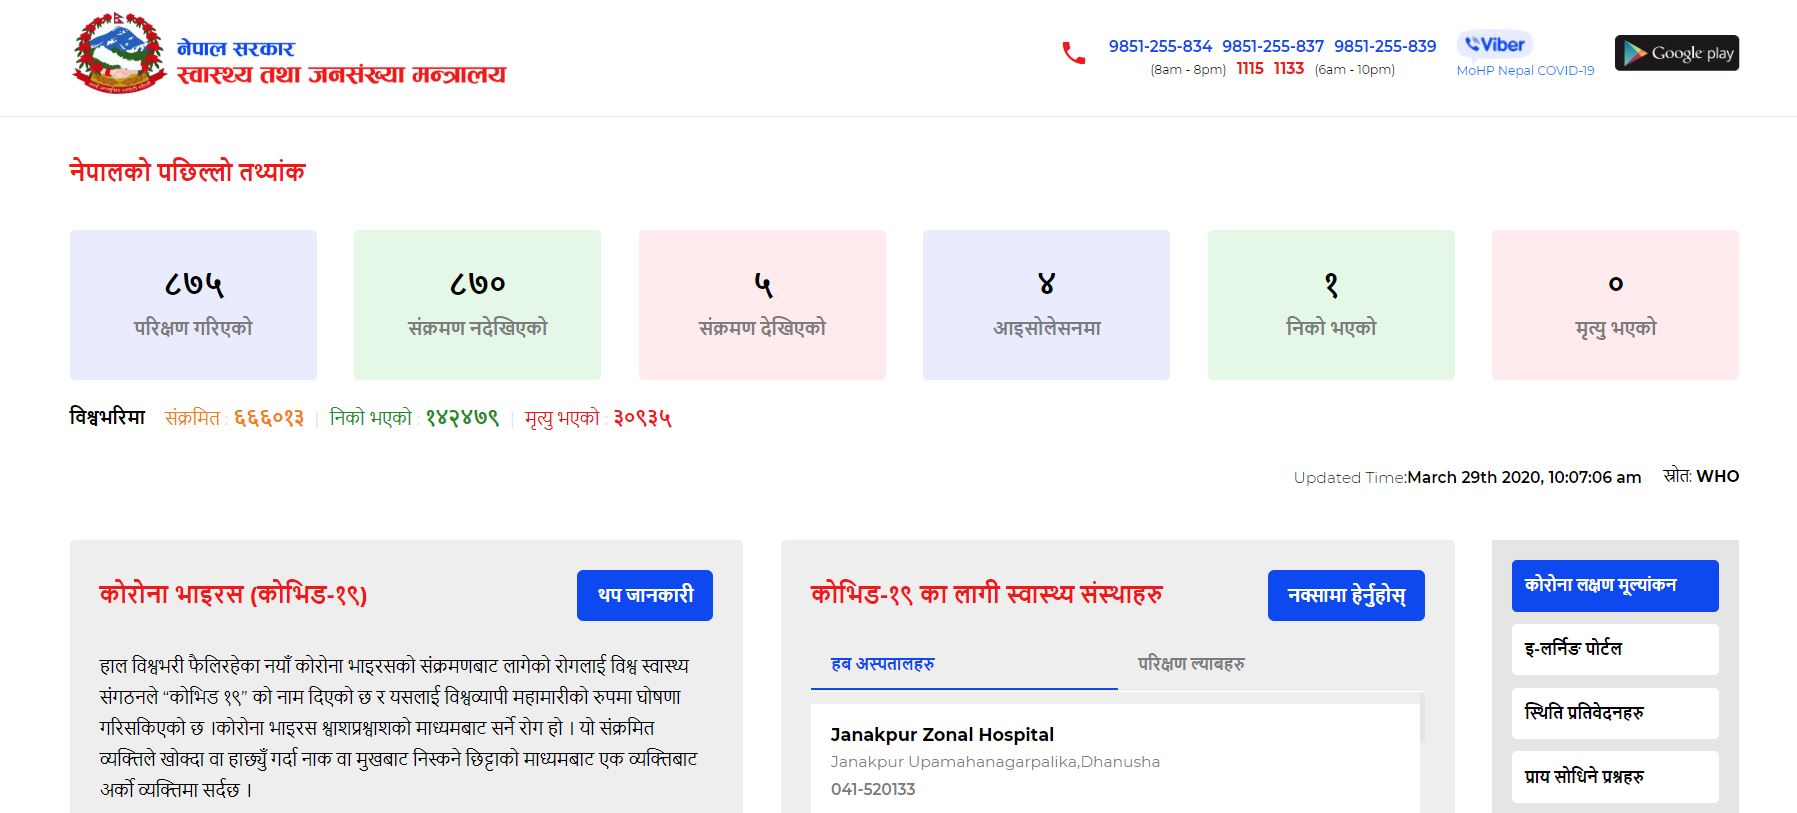 govt-launches-website-mobile-app-to-disseminate-covid-19-information